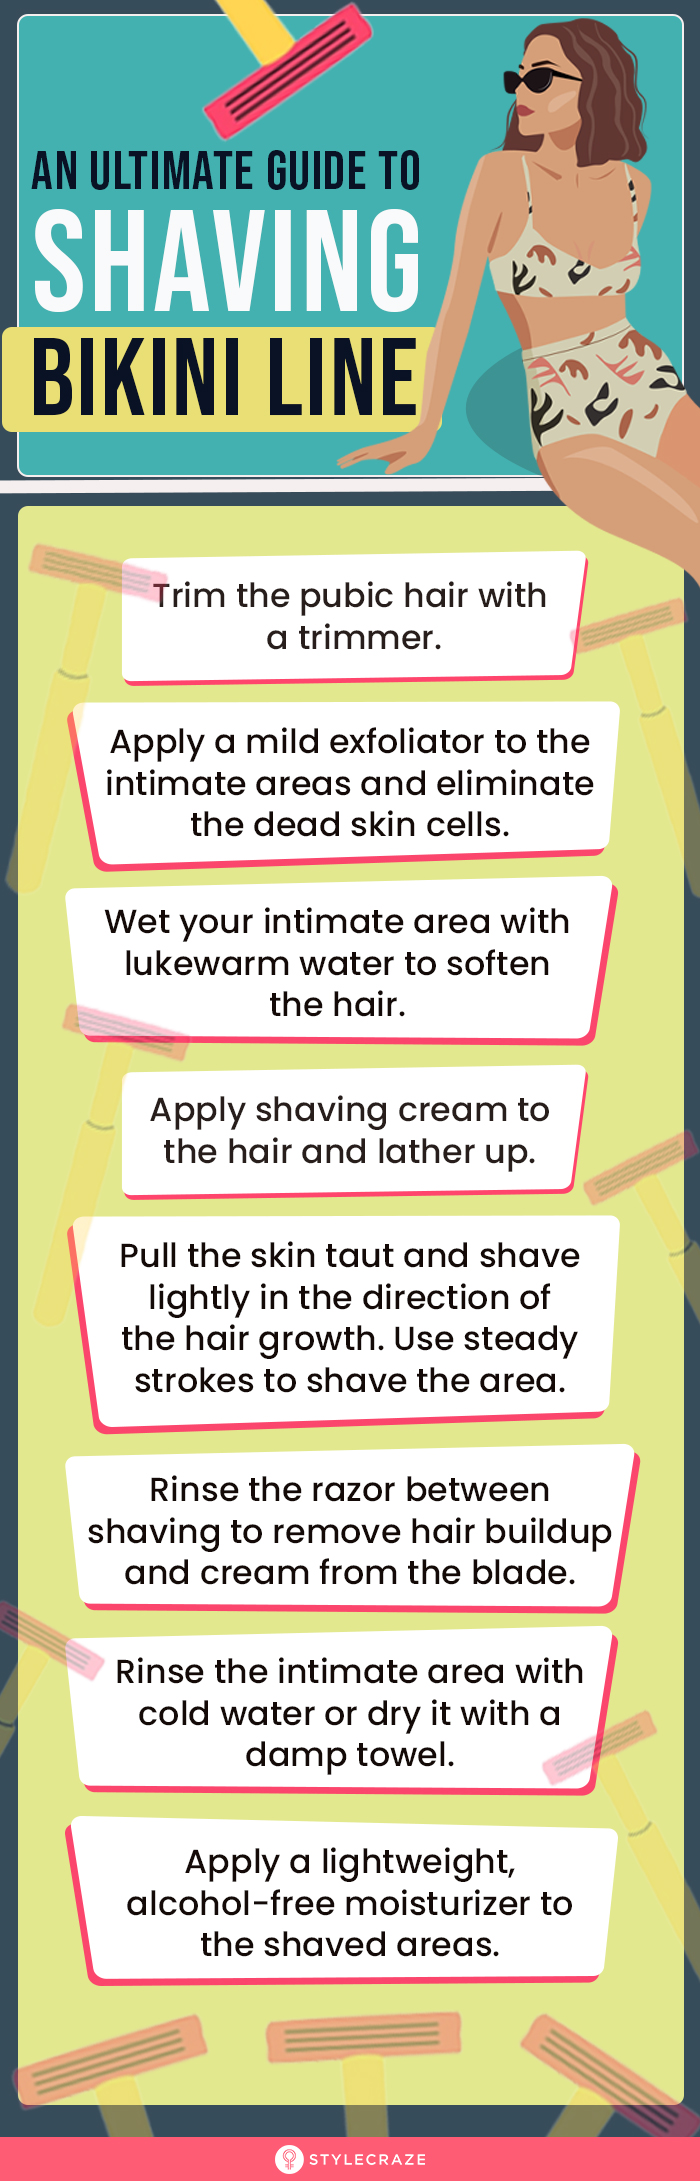 An Ultimate Guide To Shaving Bekini Line(infographic)